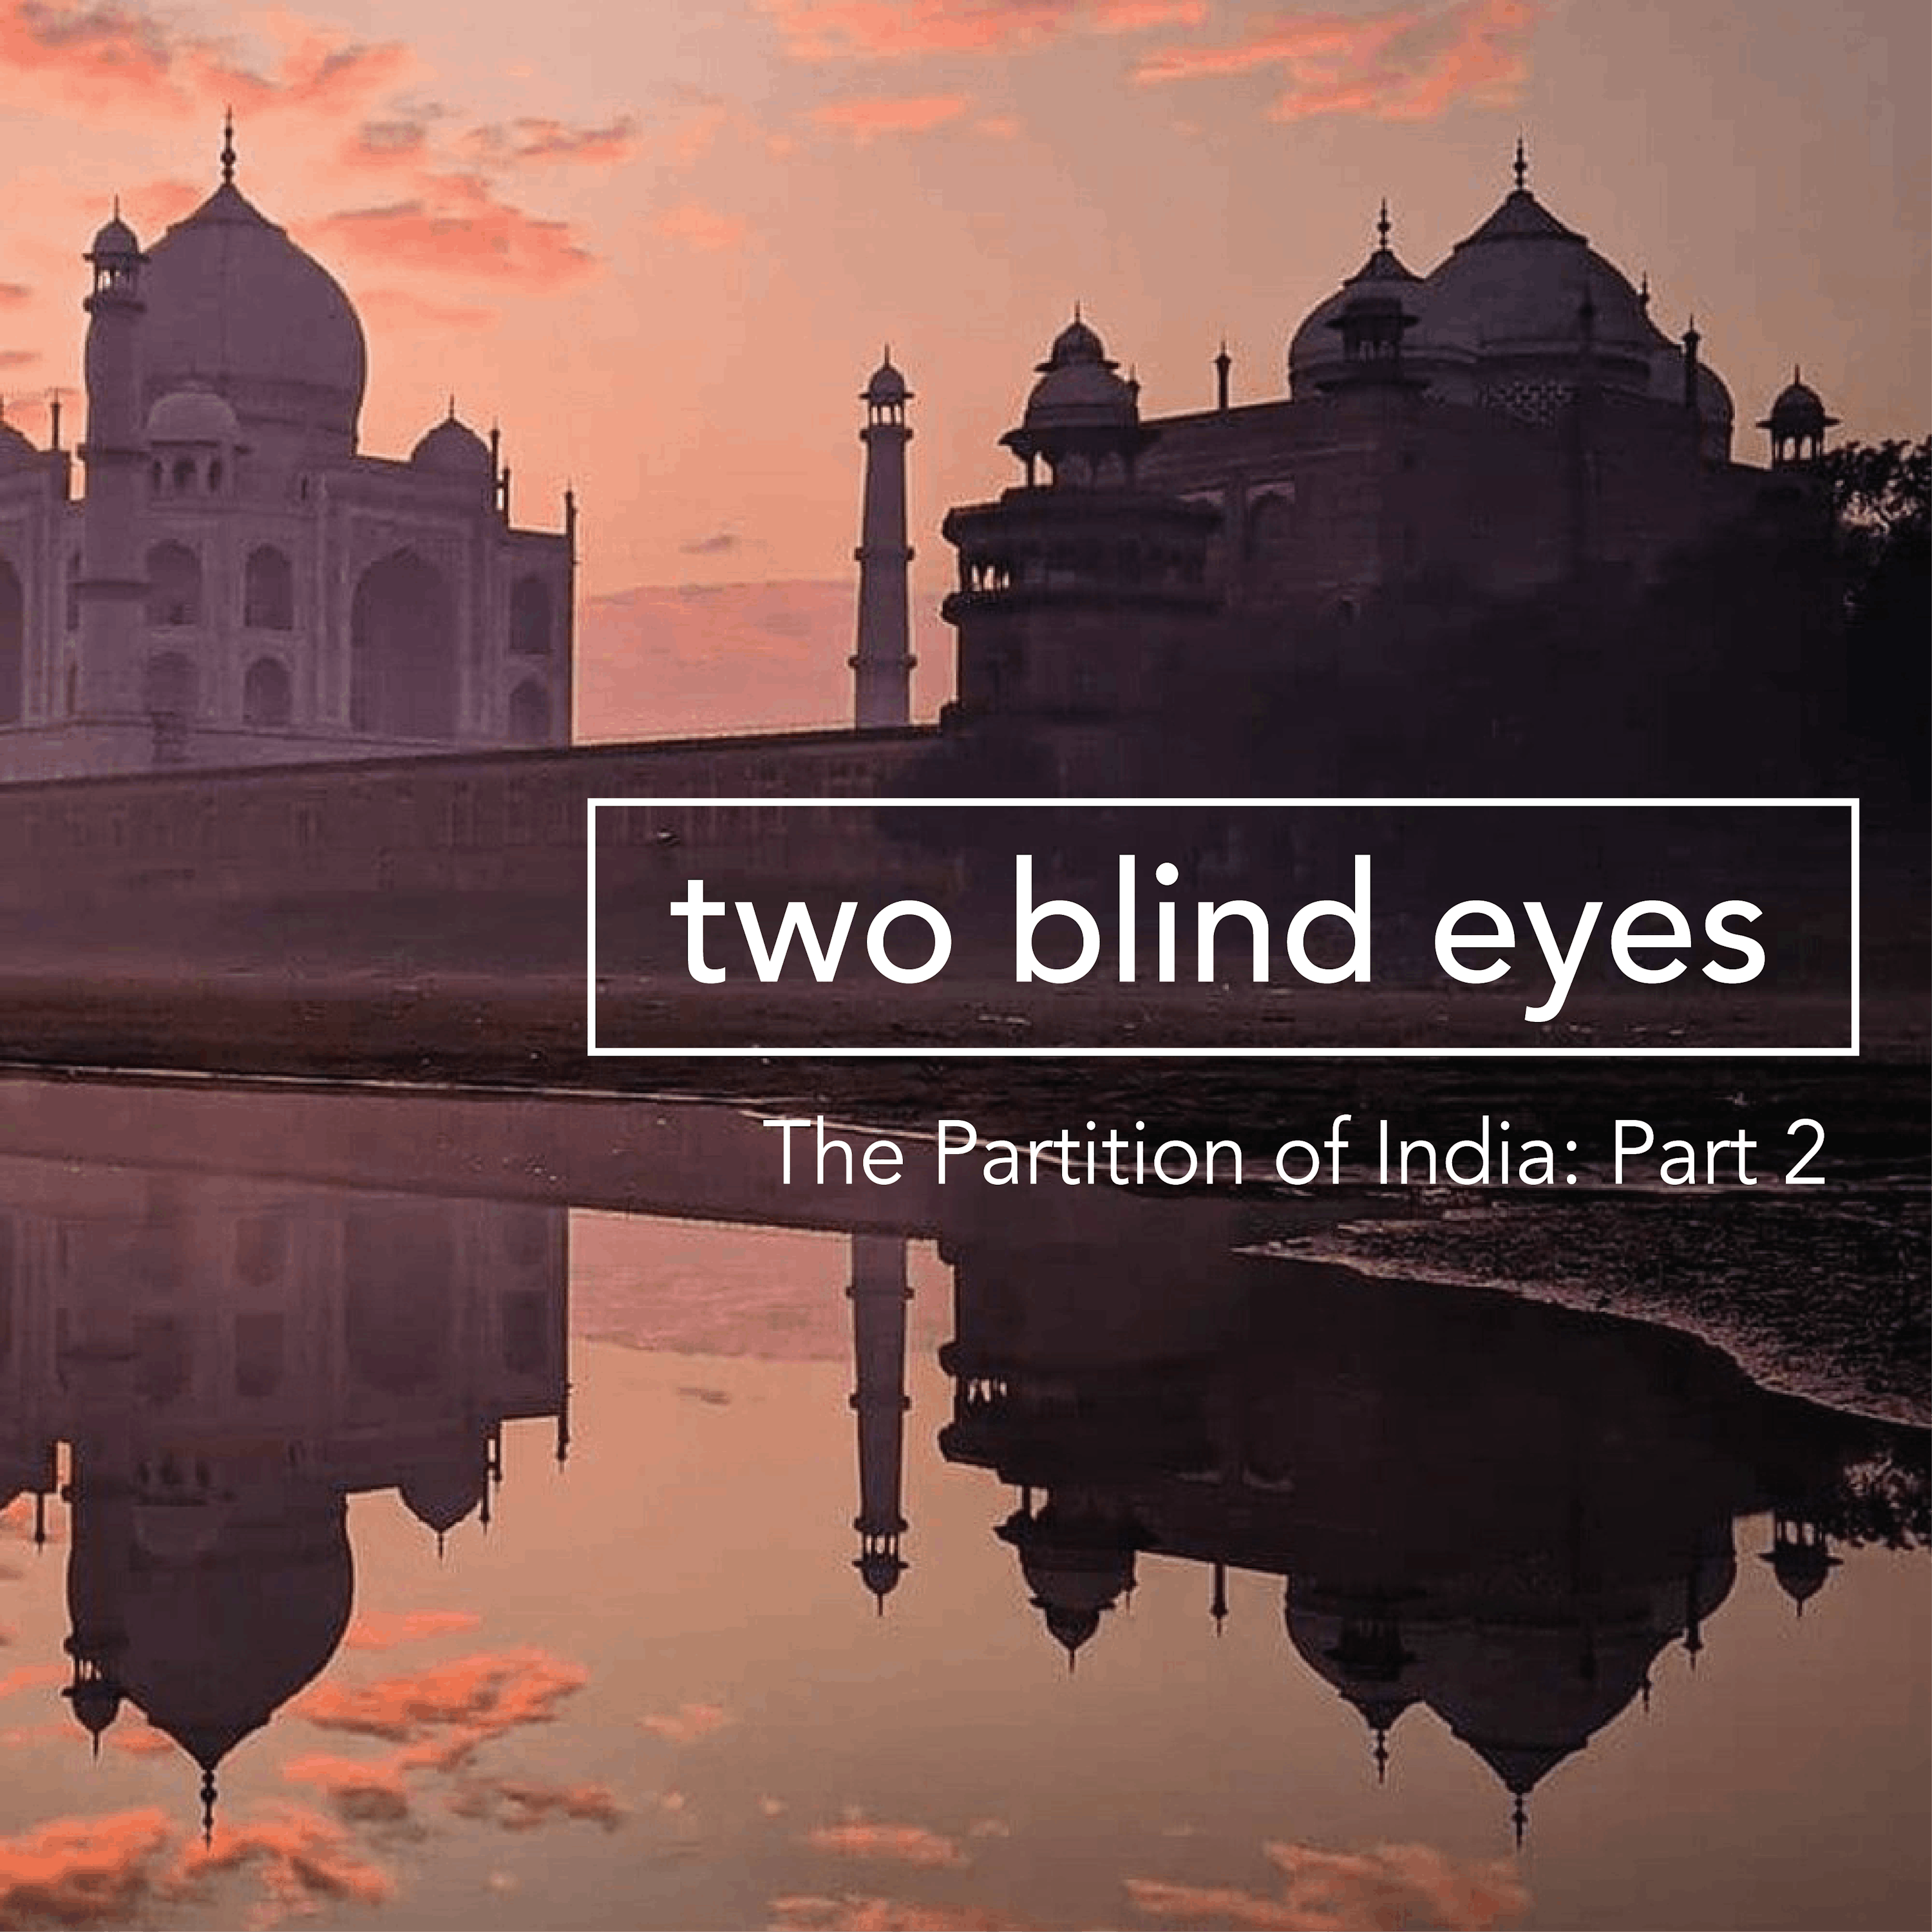 The Partition of India – Part 2: Two Blind Eyes Image